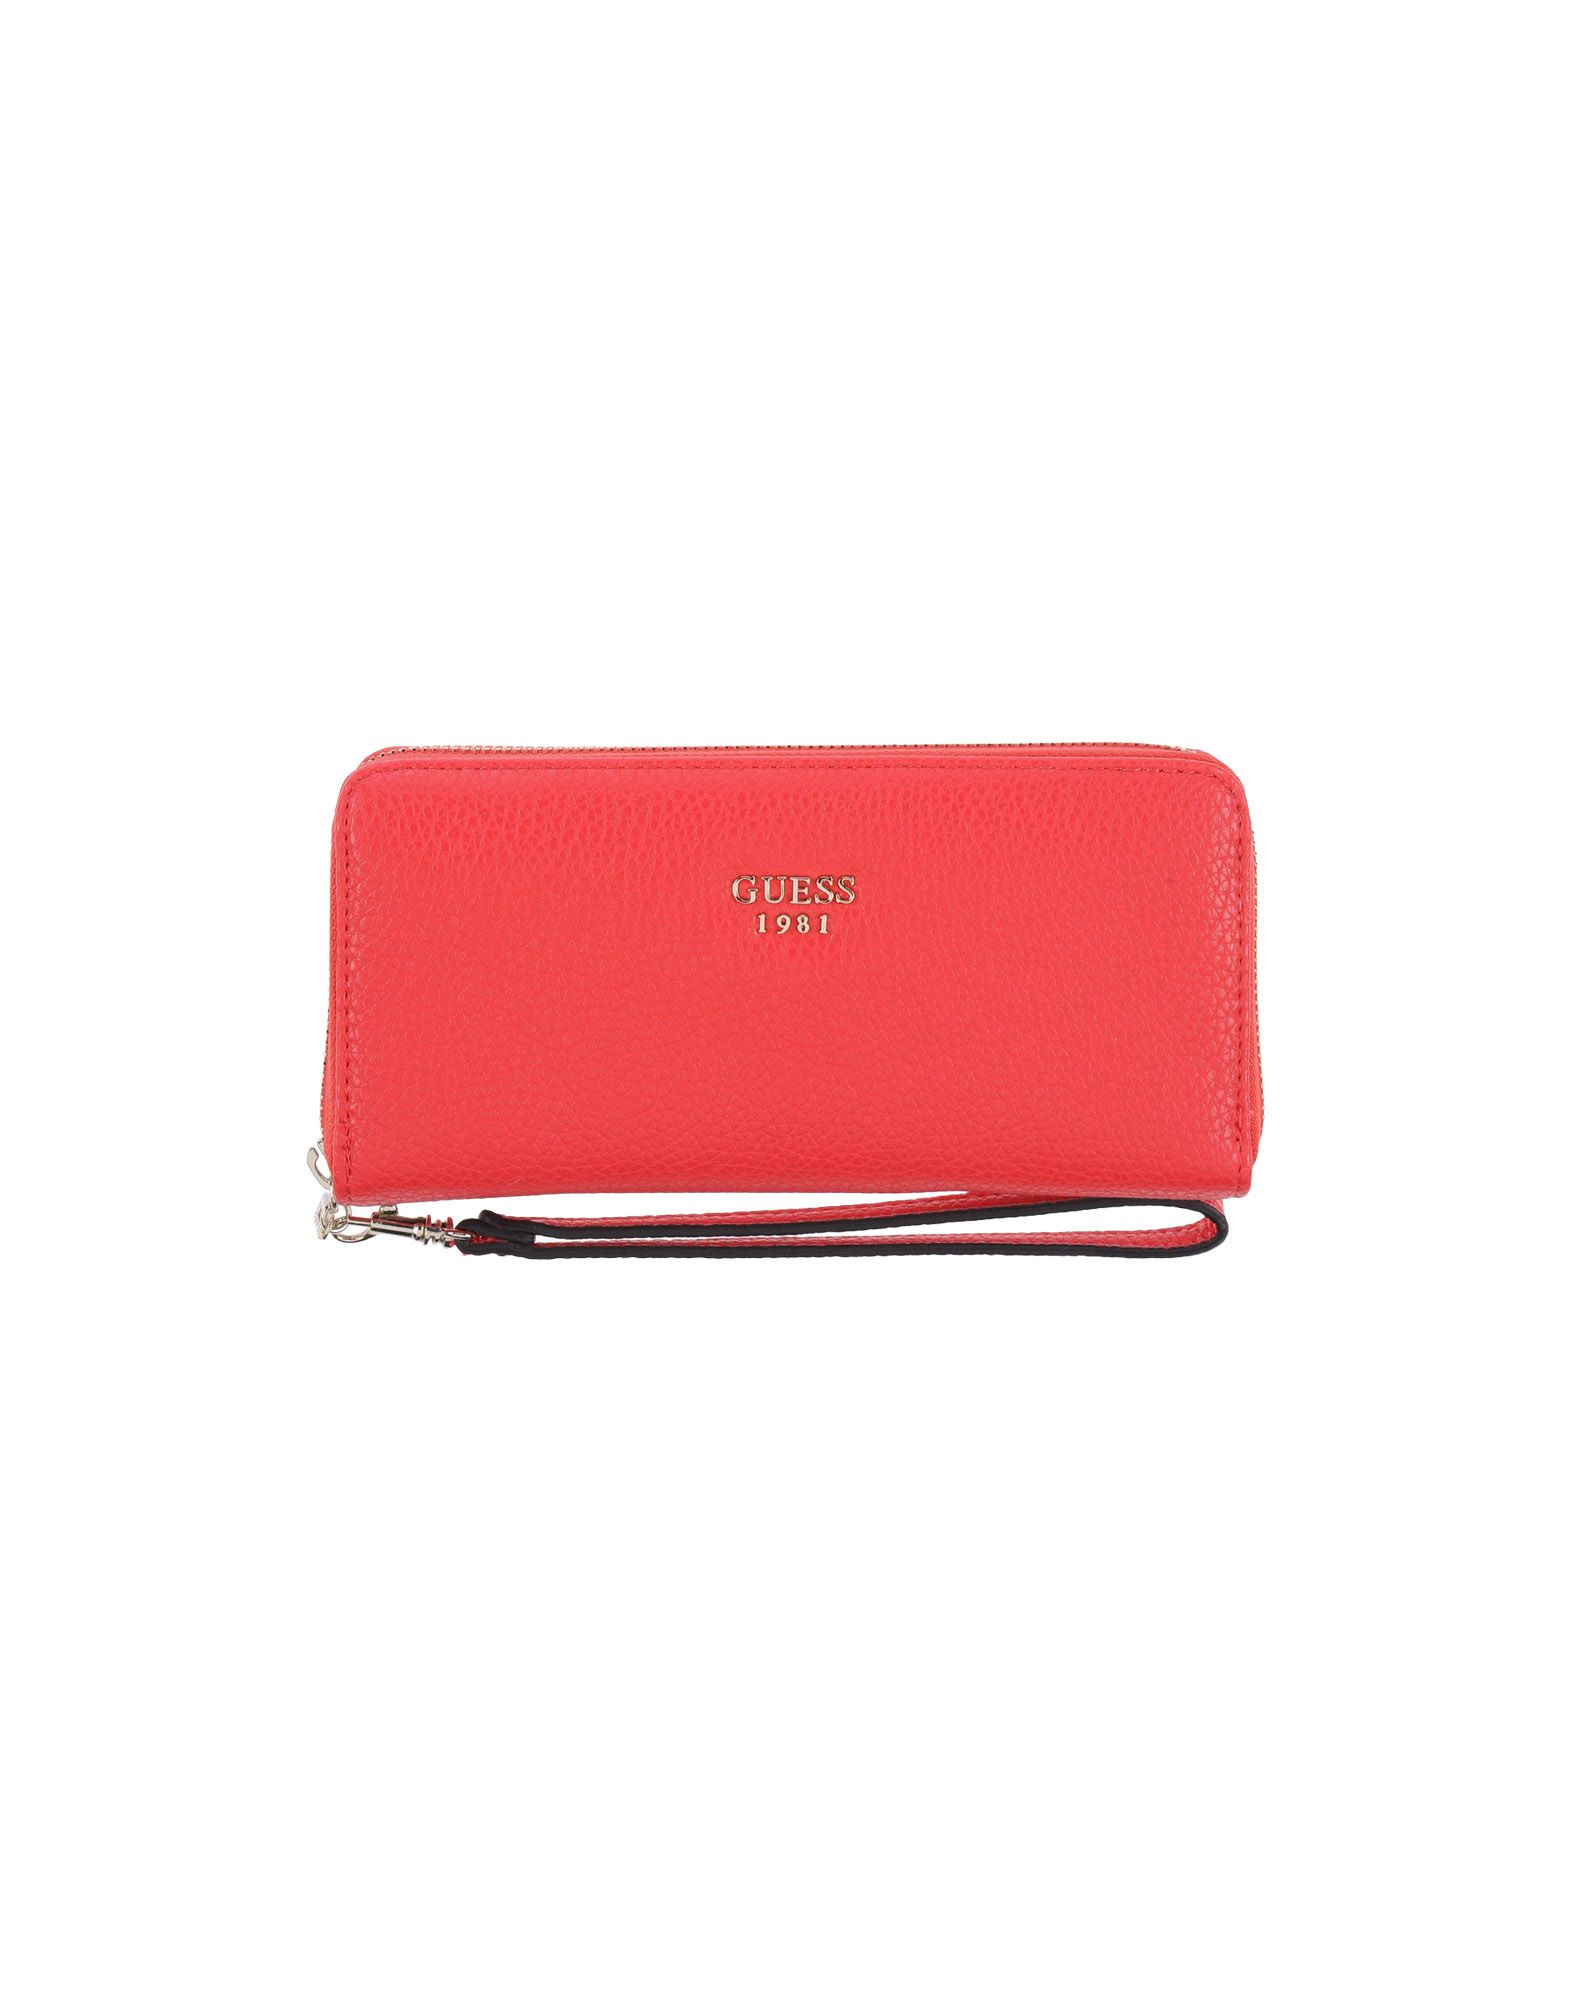 Lyst - Guess Wallet in Red